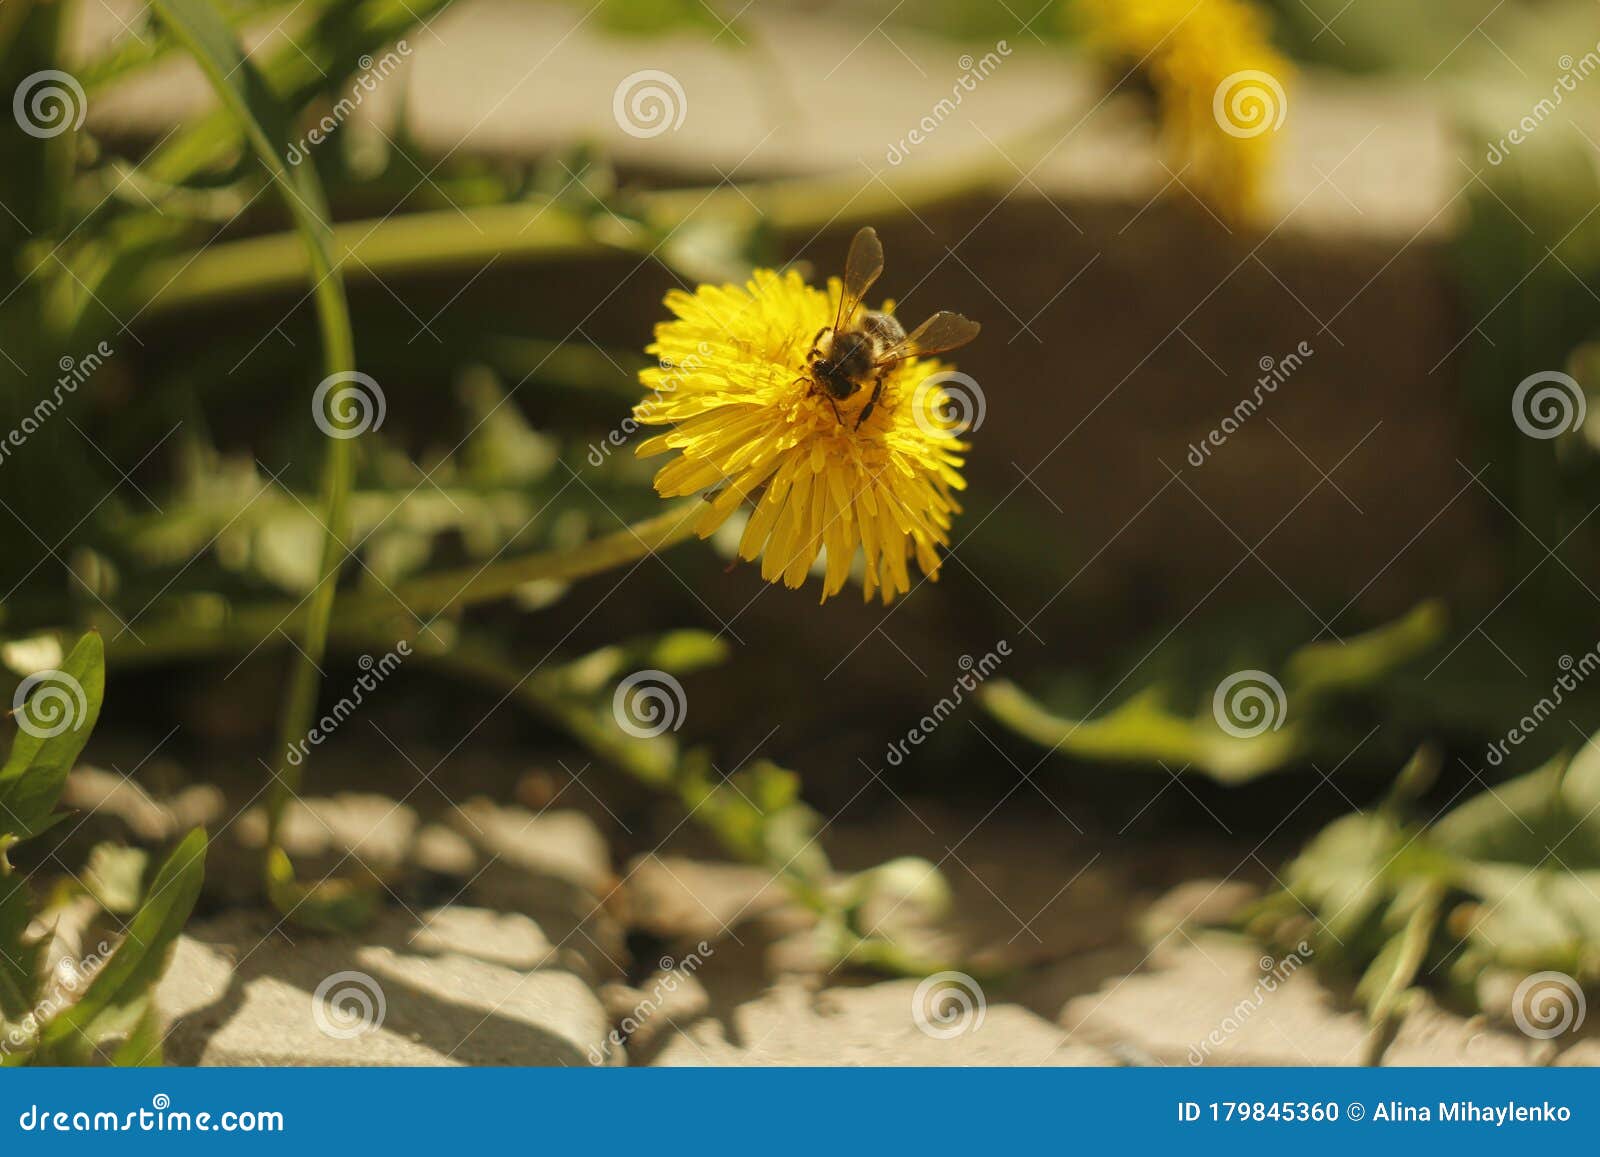 bee-on-a-dandelion-stock-photo-image-of-spring-collecting-179845360